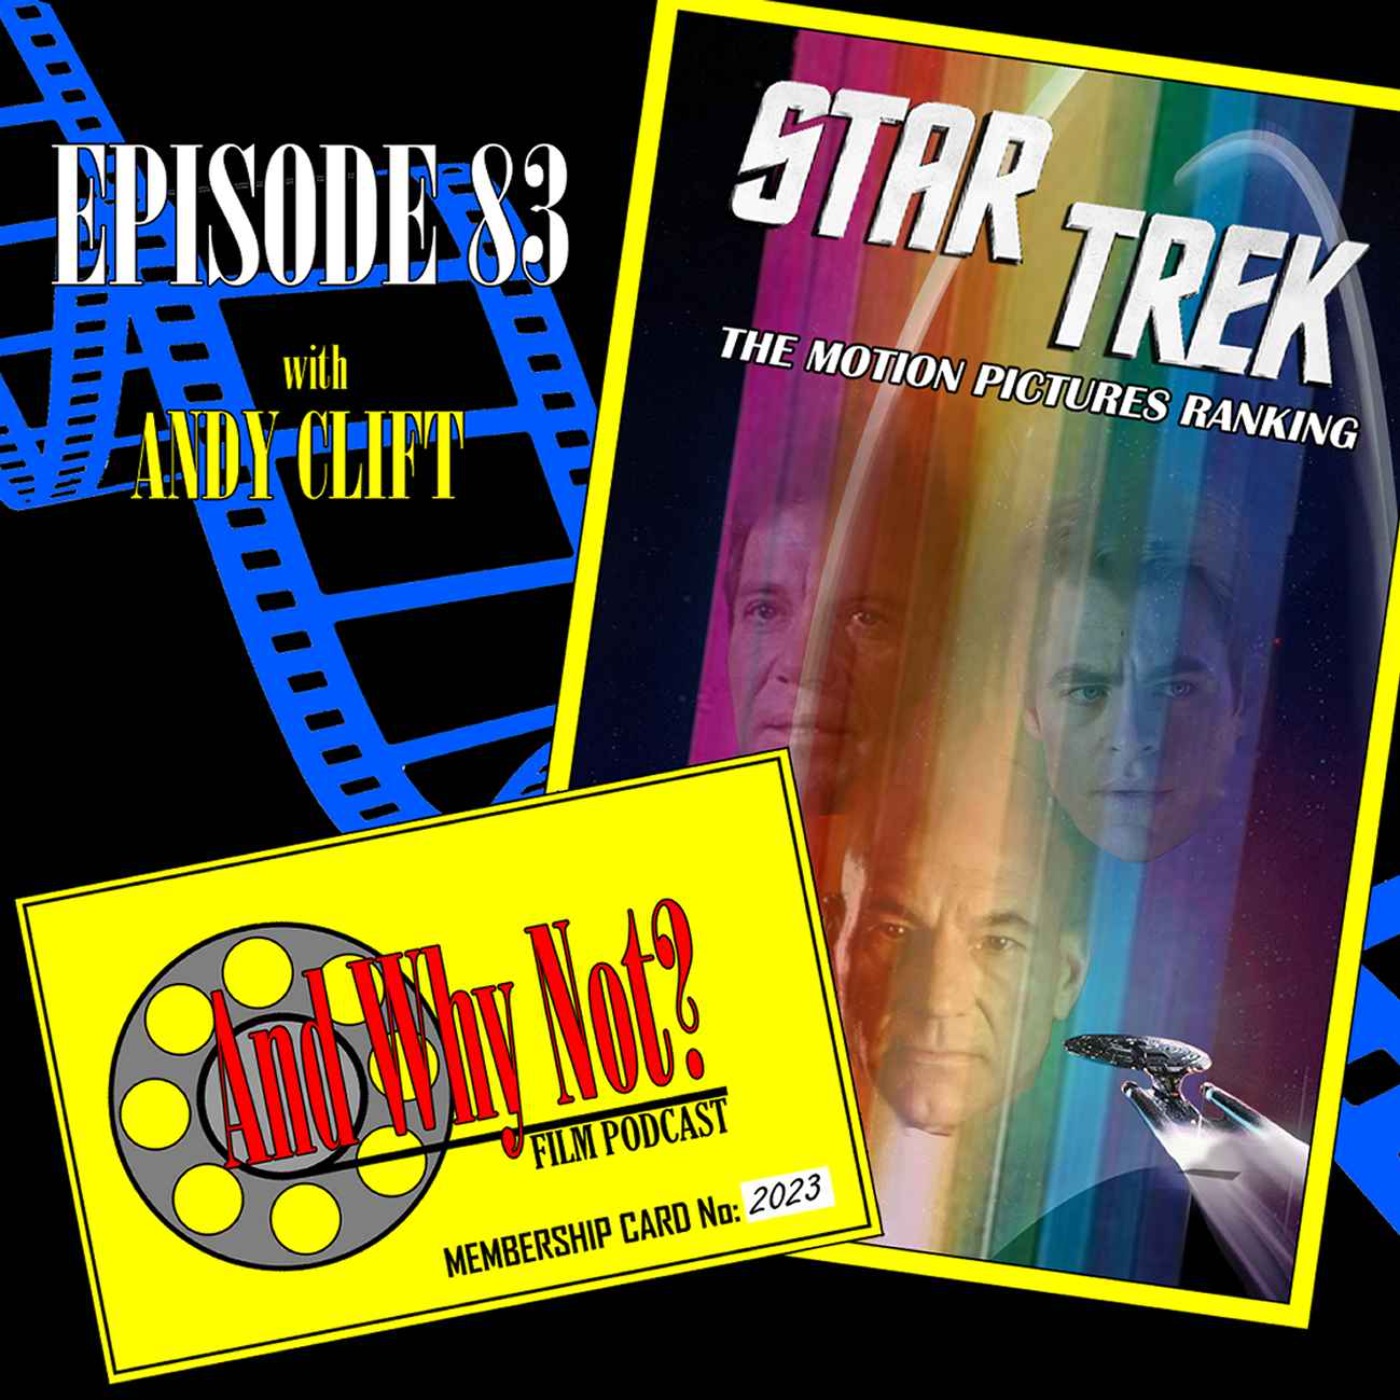 Star Trek: The Motion Pictures Ranking